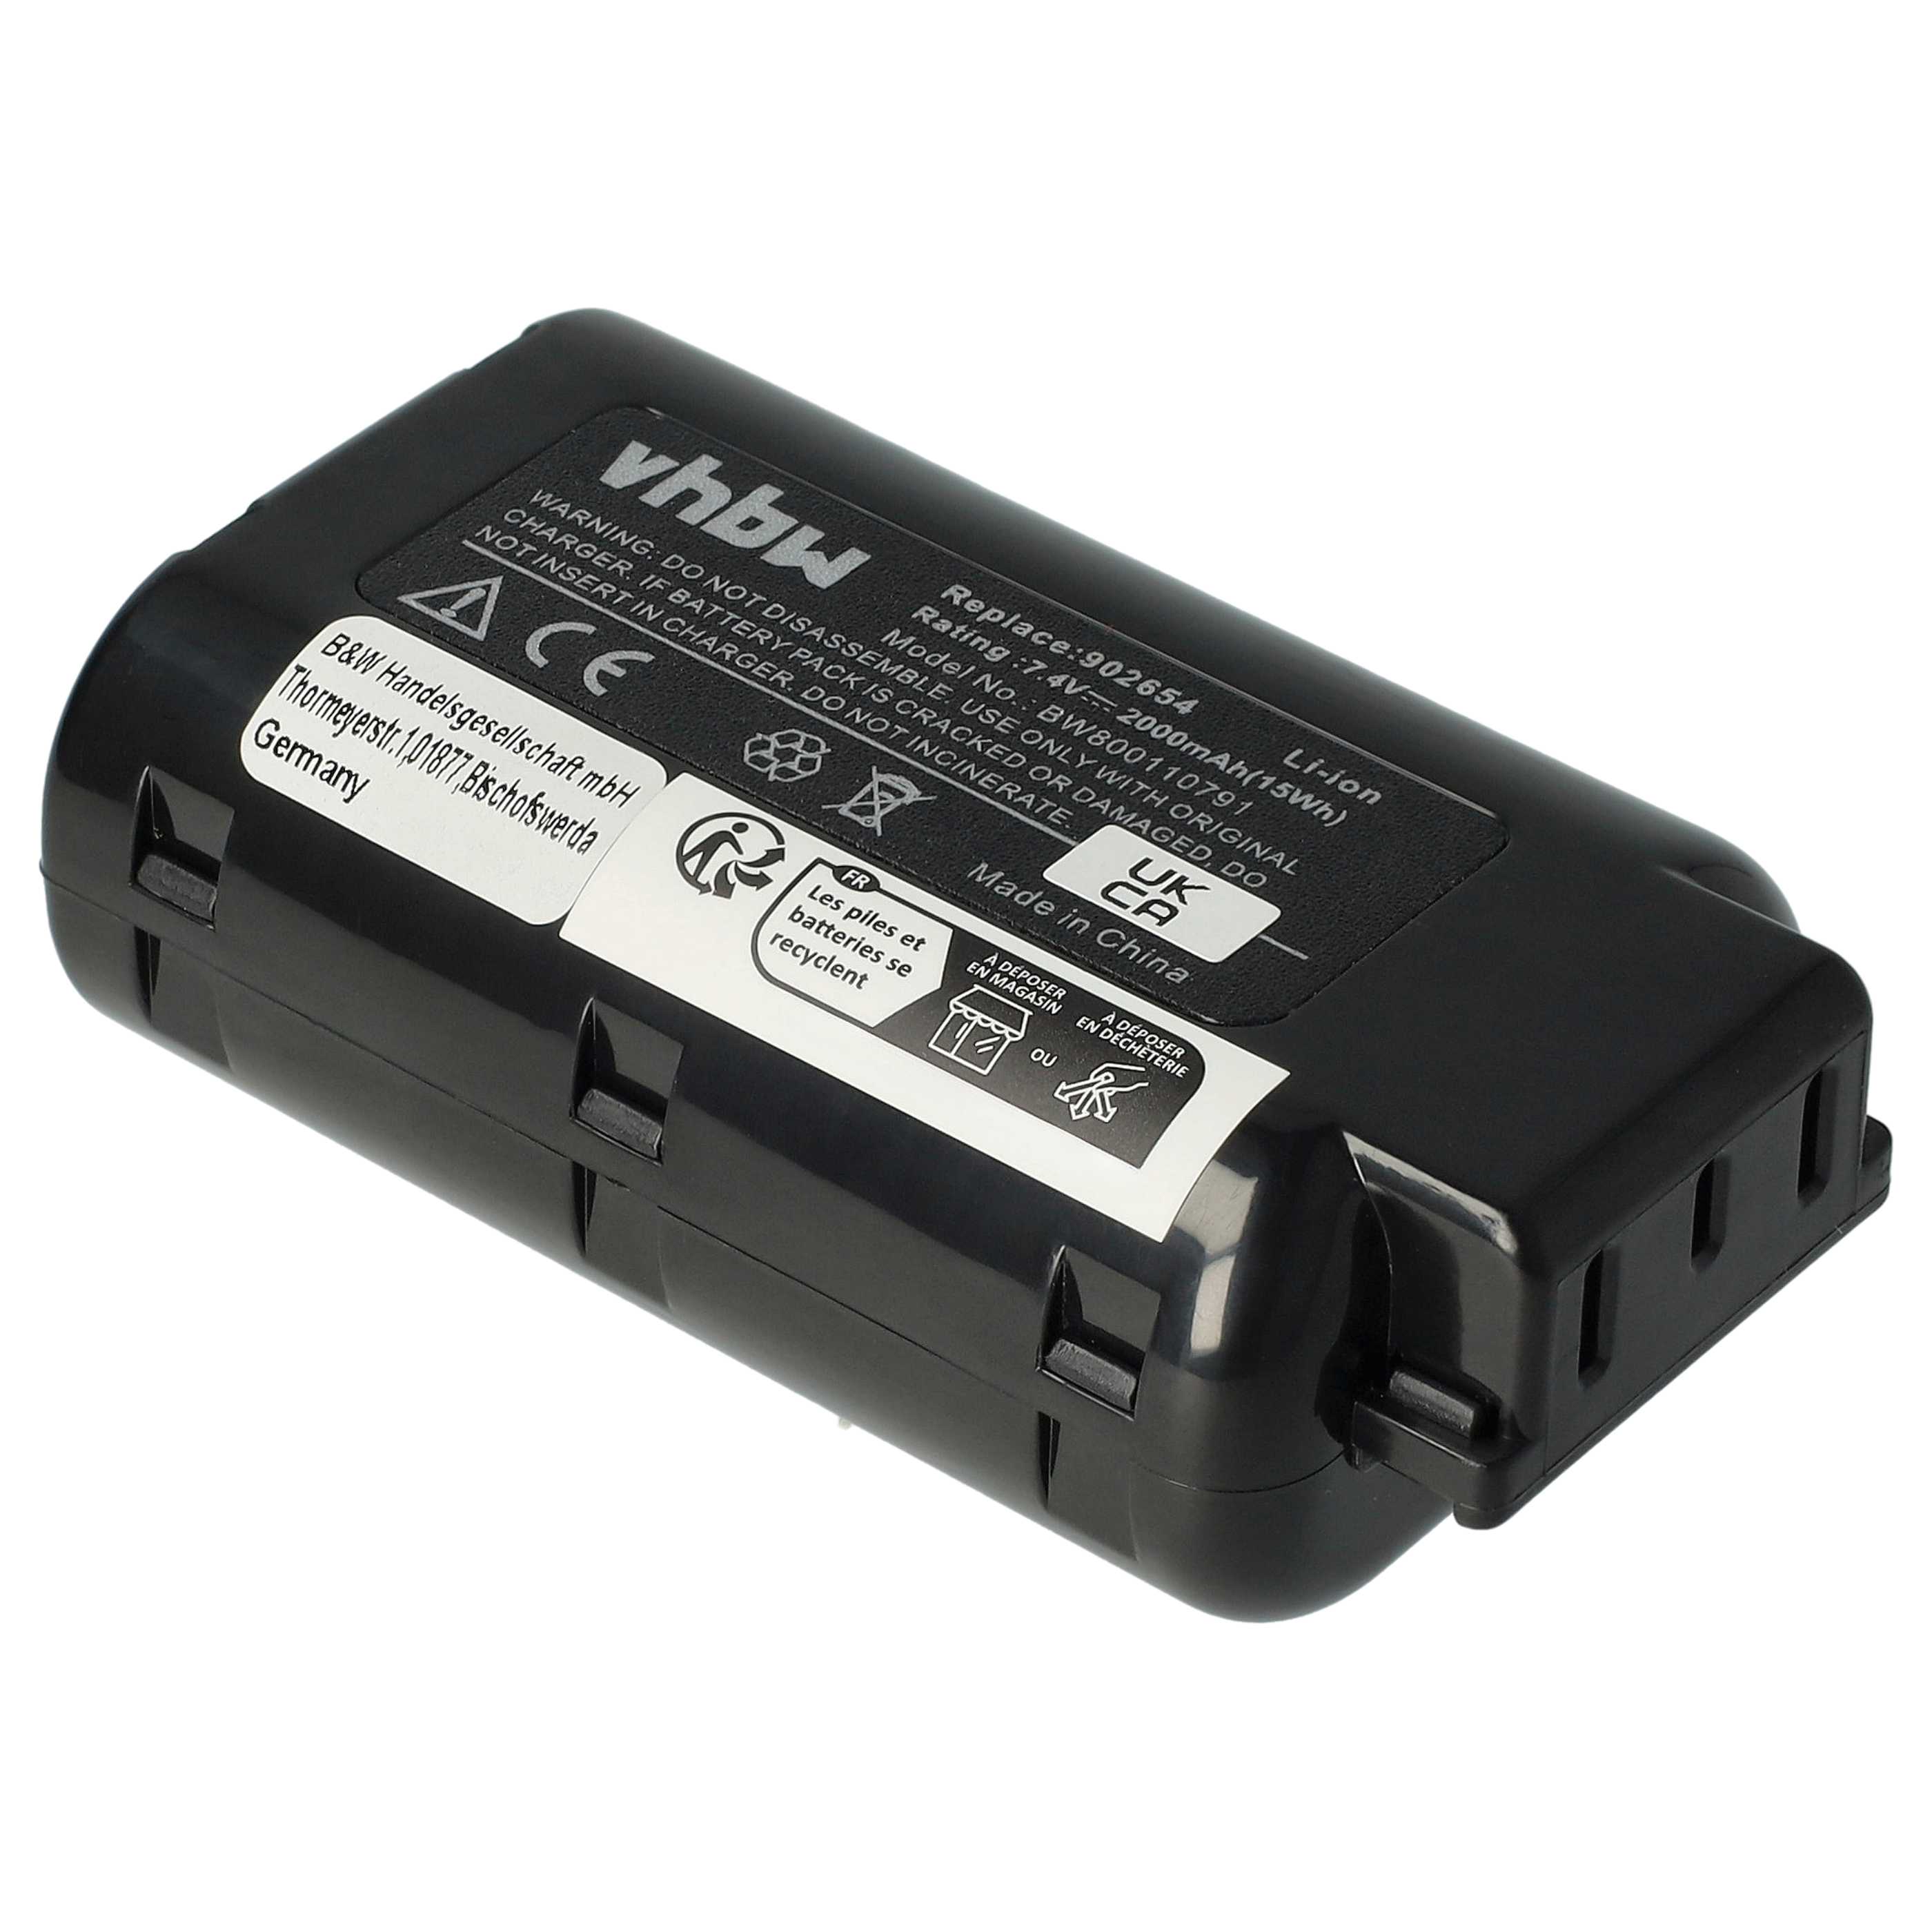 Electric Power Tool Battery Replaces Paslode 902400, 902600, 018880, 404400, 404717 - 2000 mAh, 7.4 V, Li-Ion